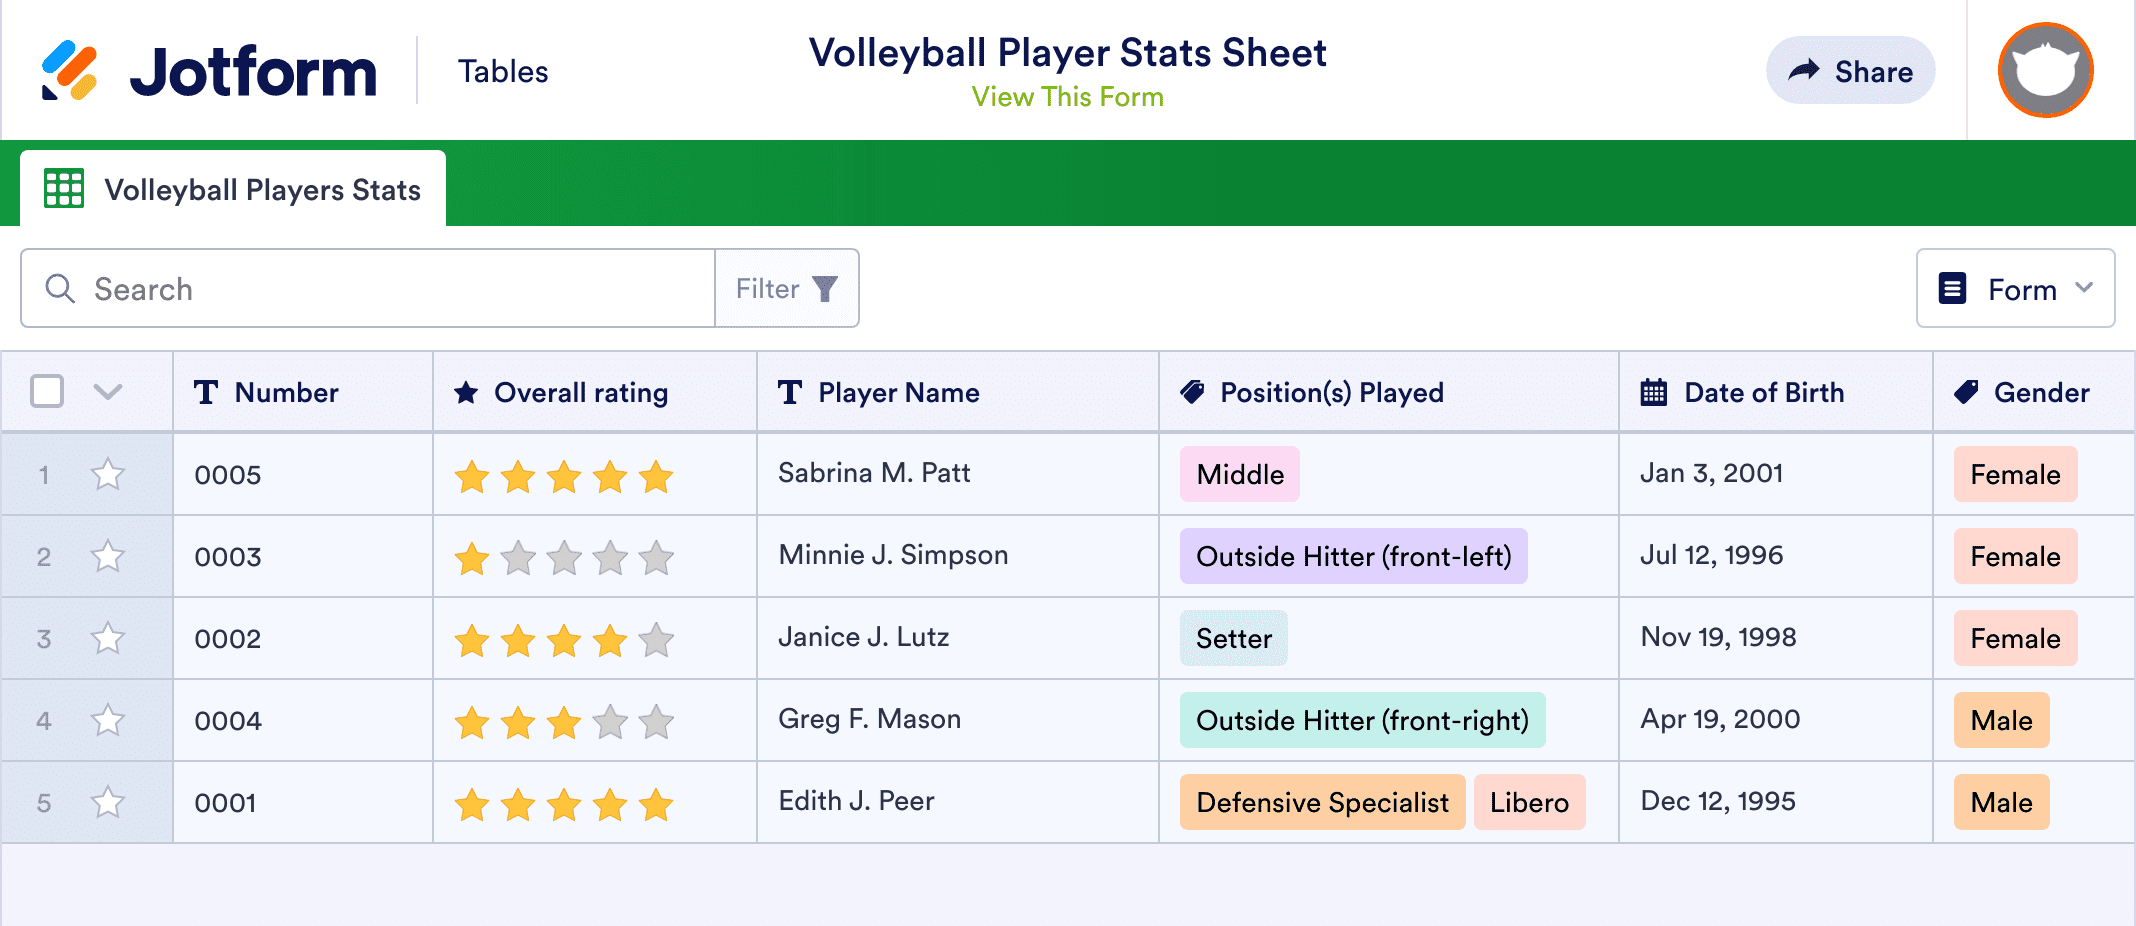 Volleyball Player Stats Sheet